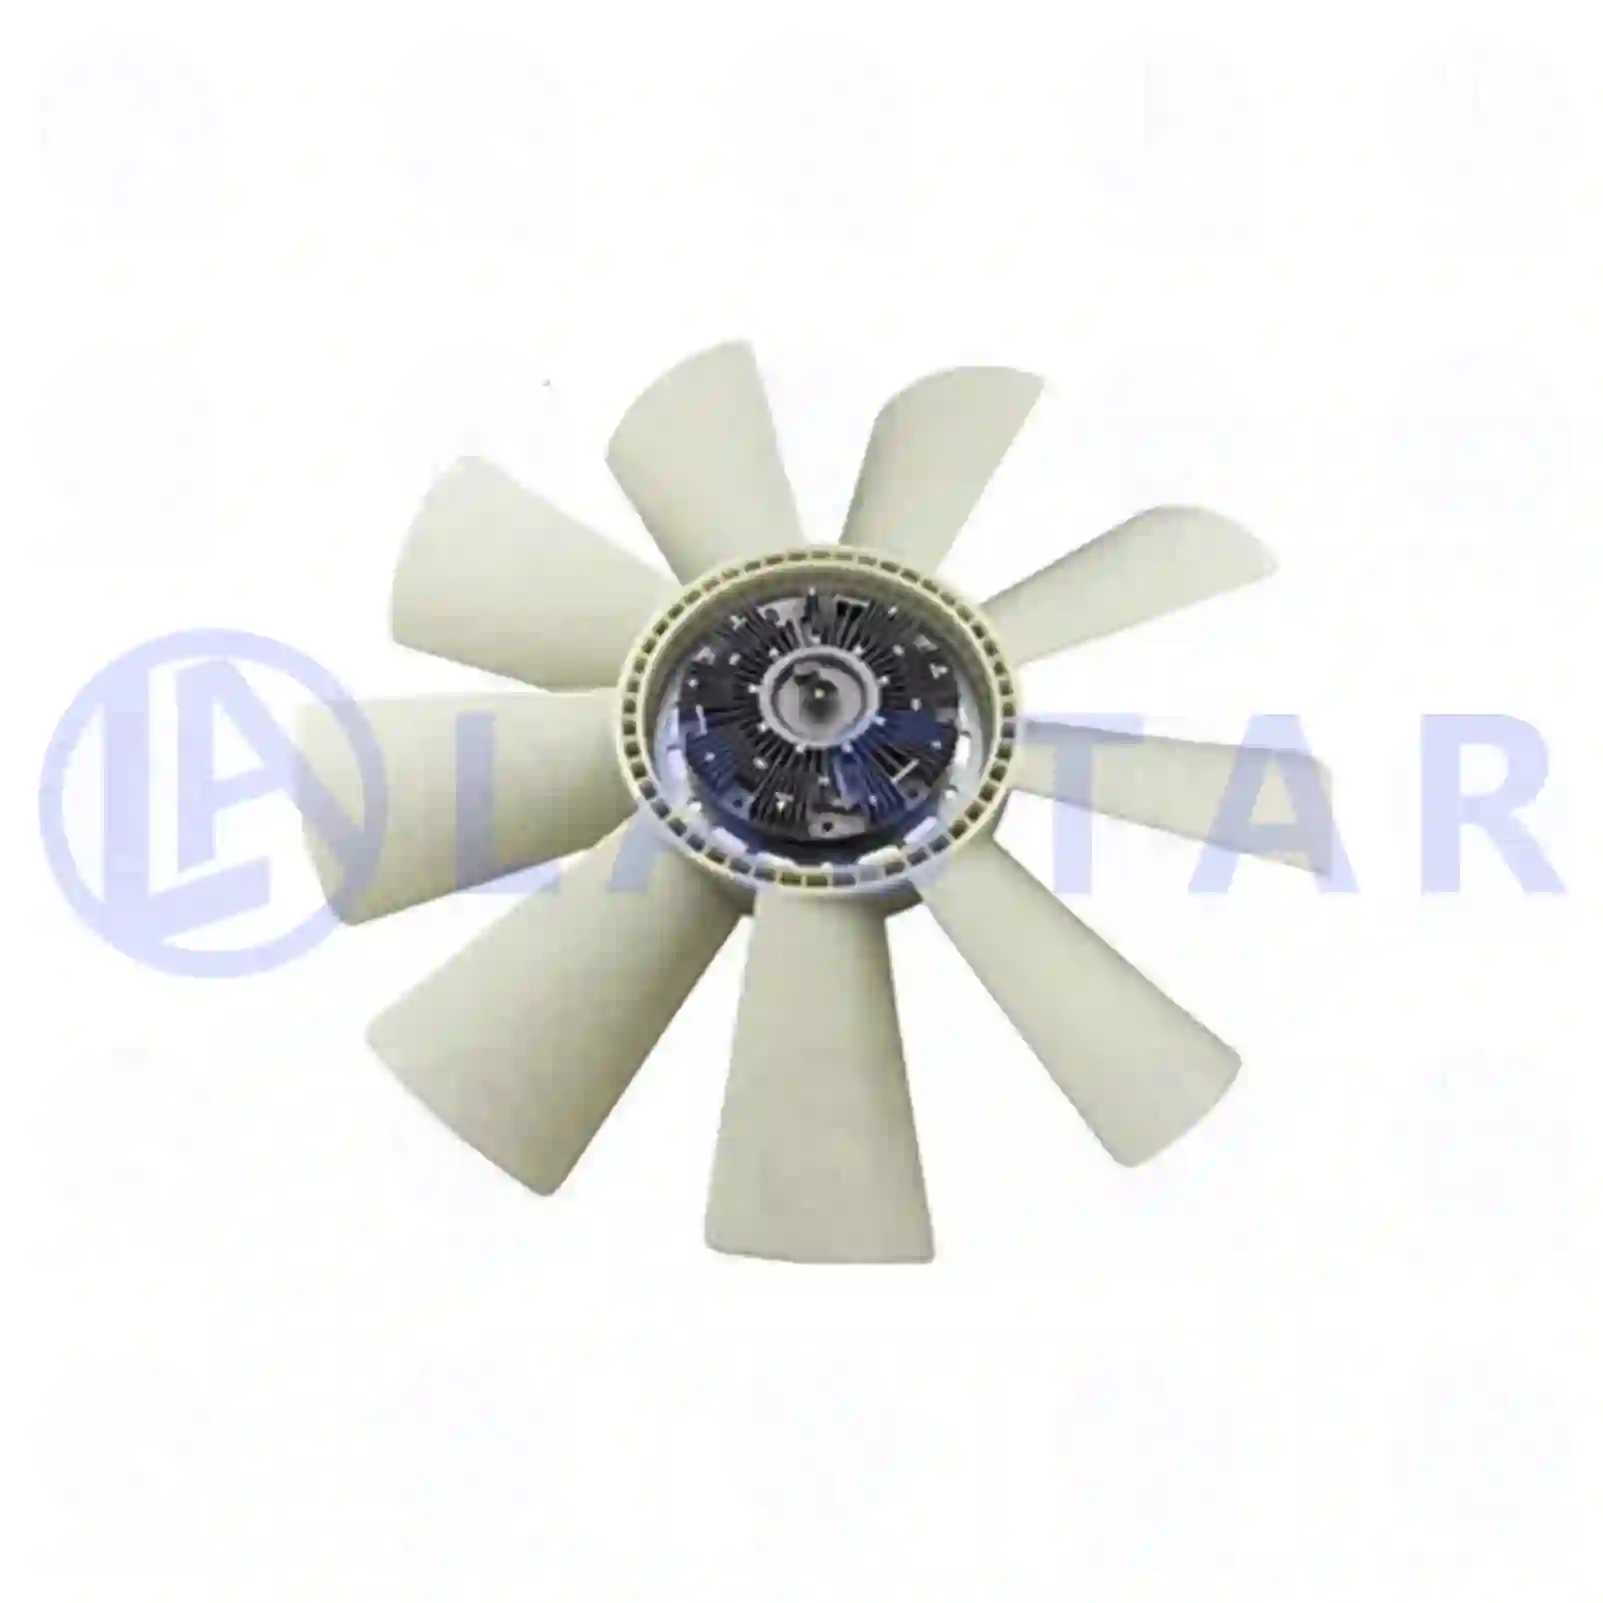 Fan with clutch, 77708815, 01459683, 10571092, 1354978, 1459683, 1571092, 571092 ||  77708815 Lastar Spare Part | Truck Spare Parts, Auotomotive Spare Parts Fan with clutch, 77708815, 01459683, 10571092, 1354978, 1459683, 1571092, 571092 ||  77708815 Lastar Spare Part | Truck Spare Parts, Auotomotive Spare Parts